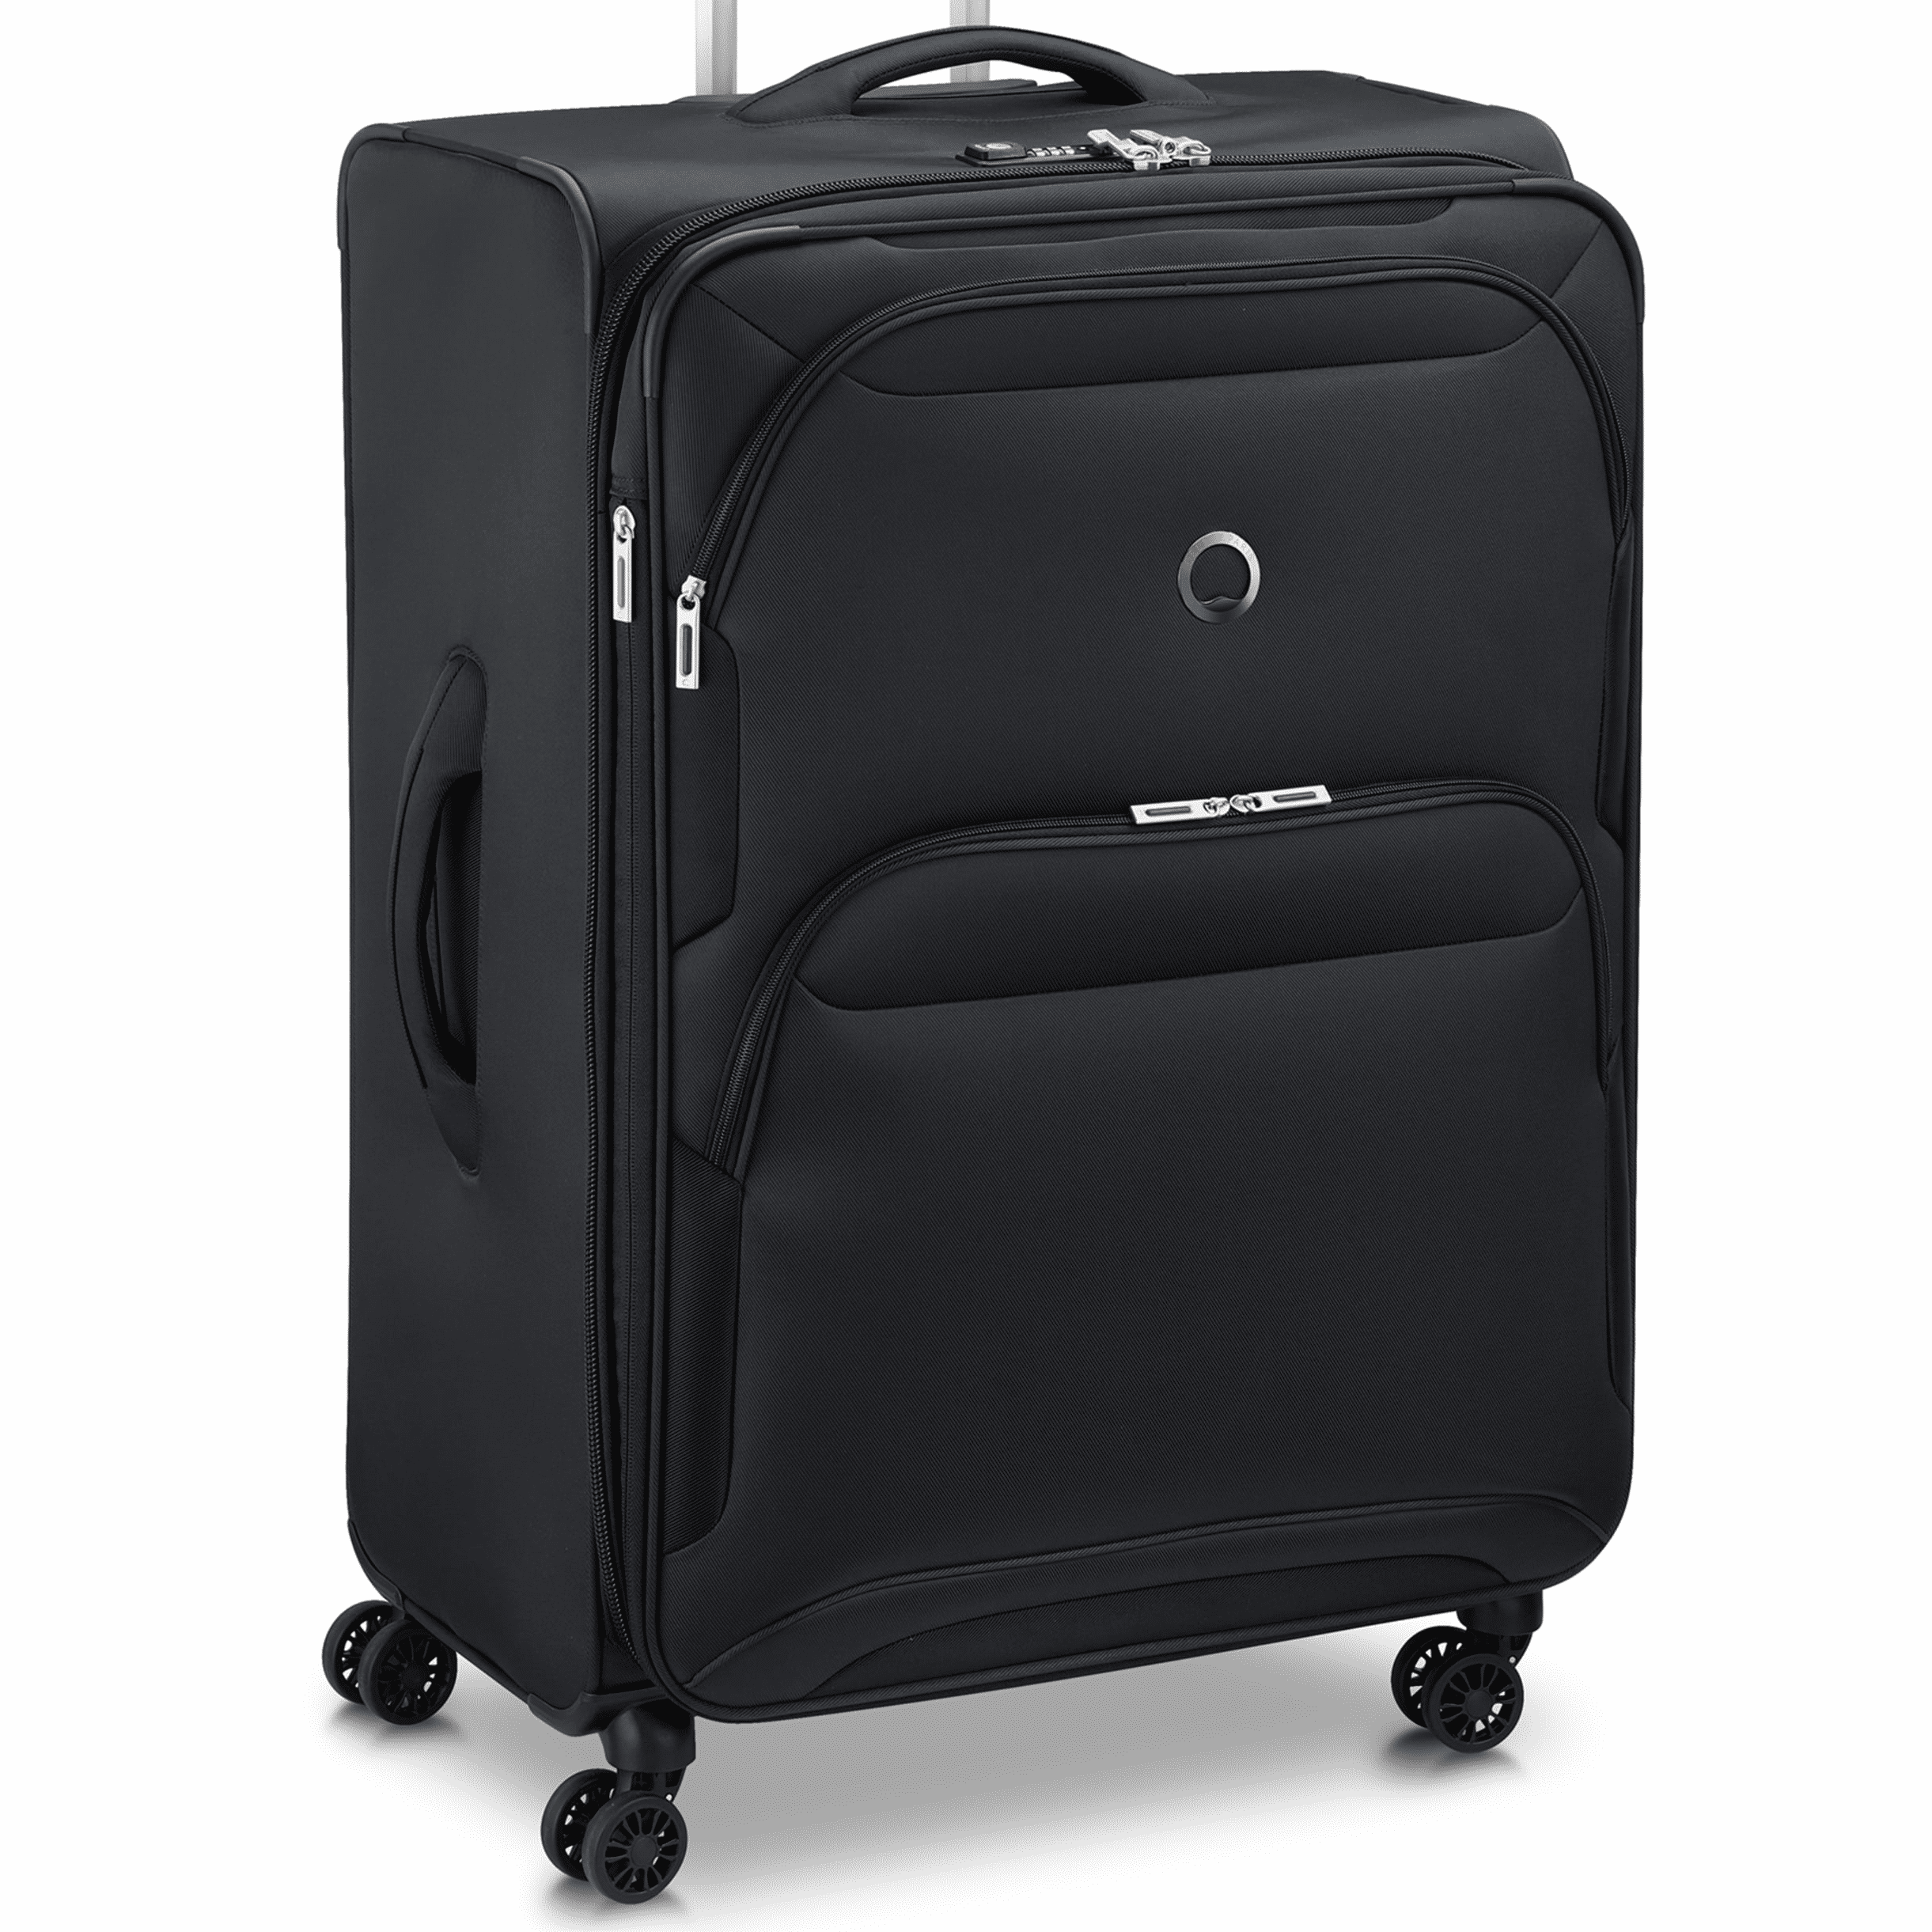 Delsey Paris Sky Max Luggage Collection | belk